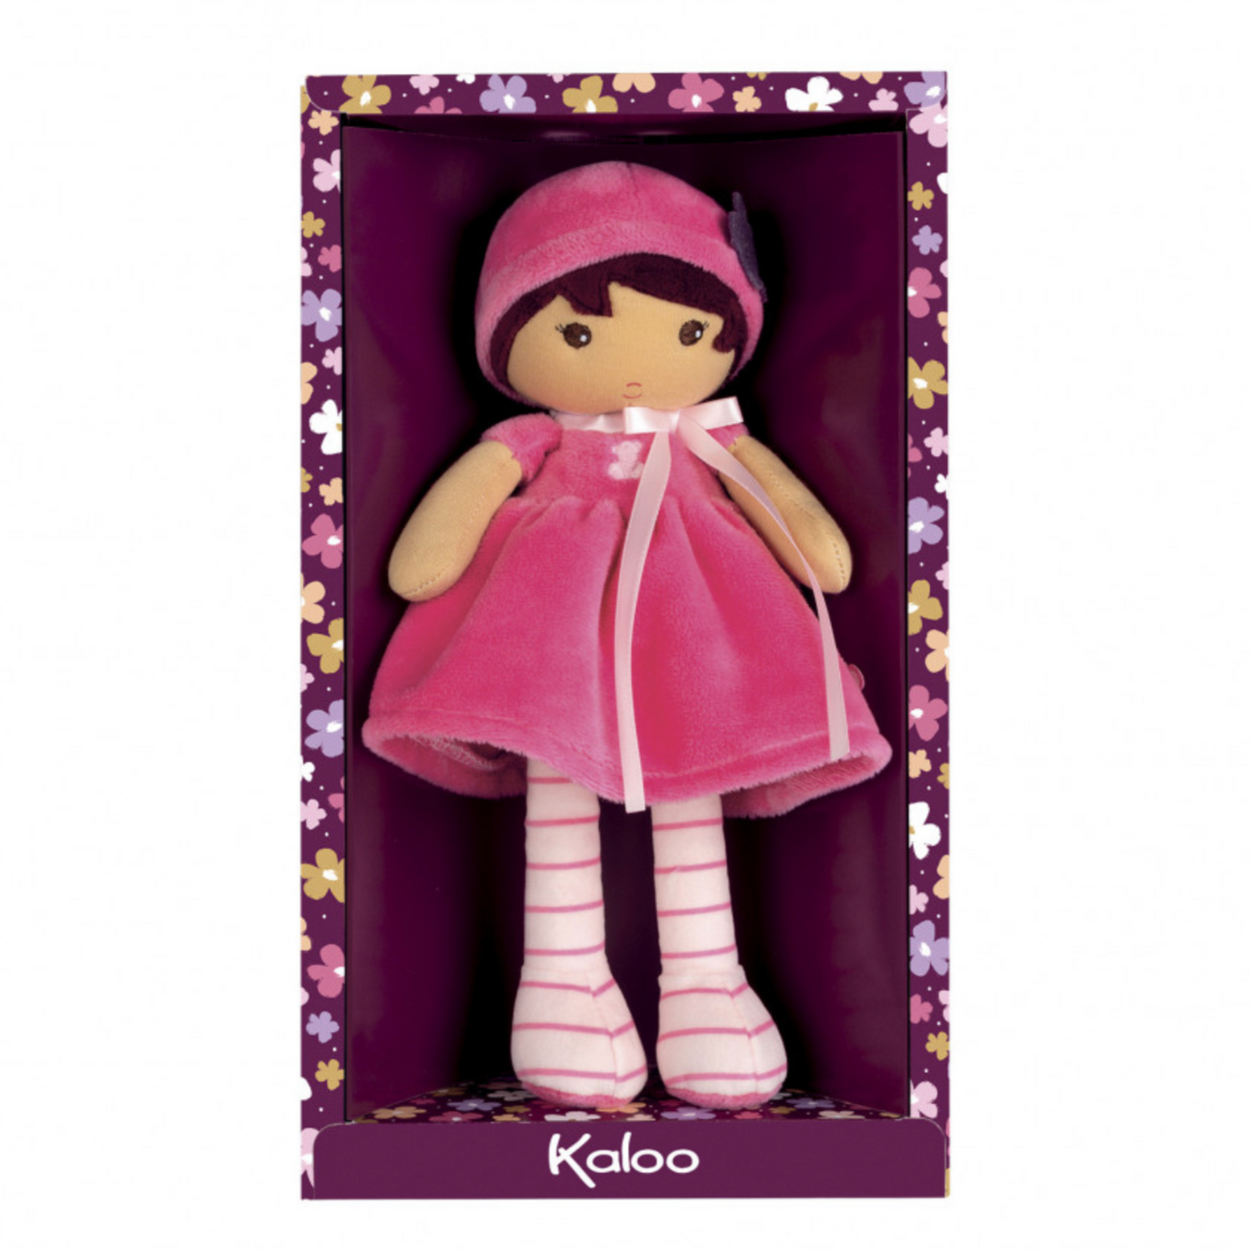 Kaloo Emma K Doll - 7 inch - Best Baby Toys & Gifts for Ages 0 to 6